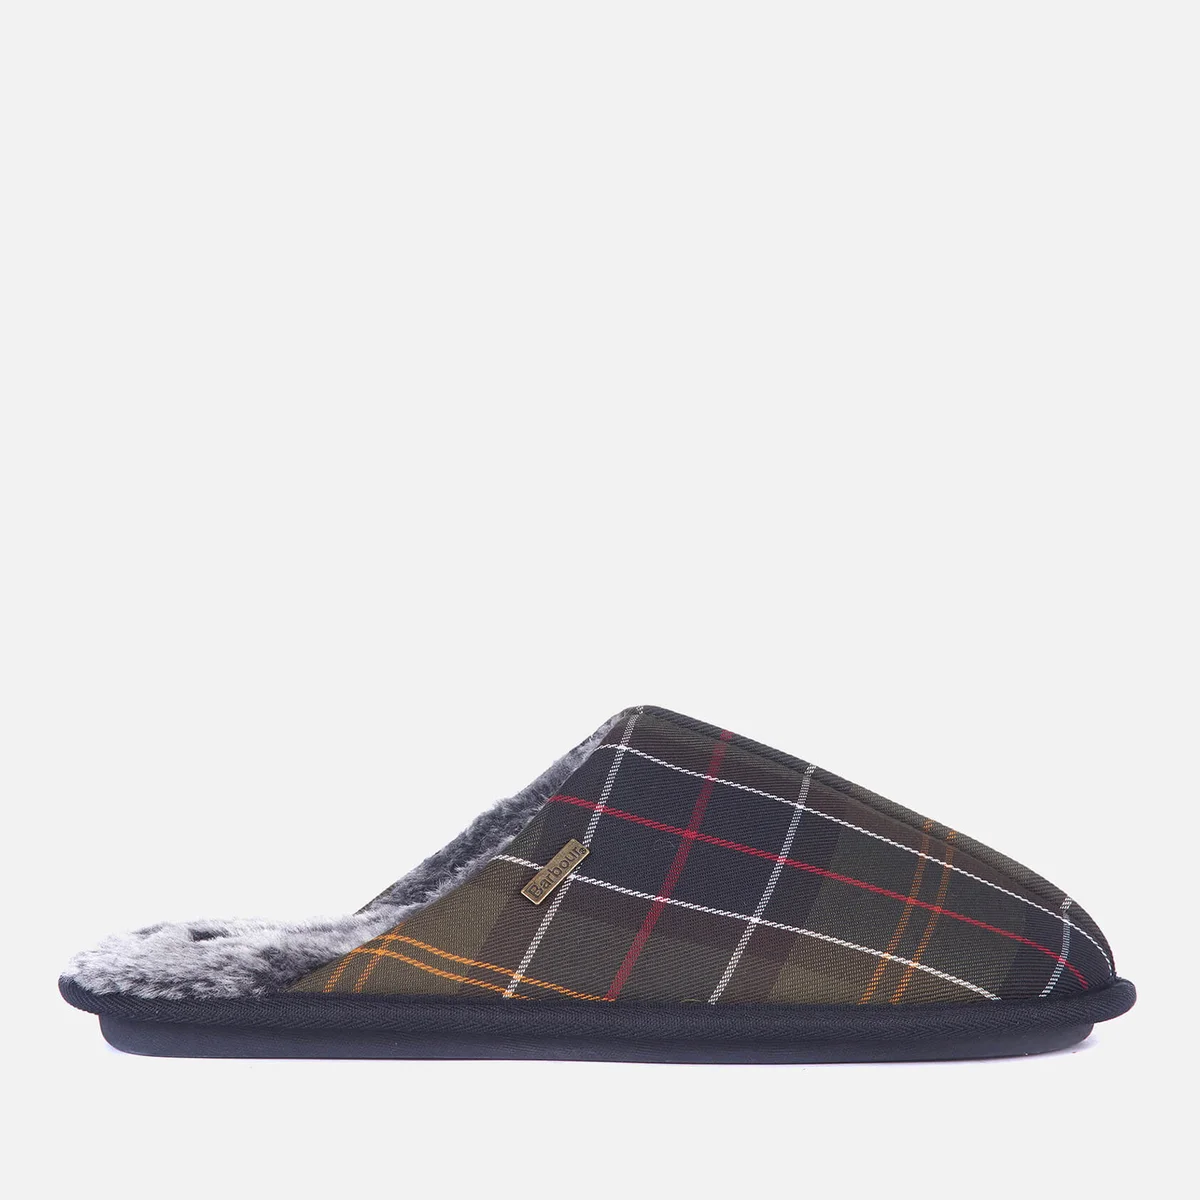 Barbour Men's Young Mule Slippers - Recycled Classic Tartan Image 1